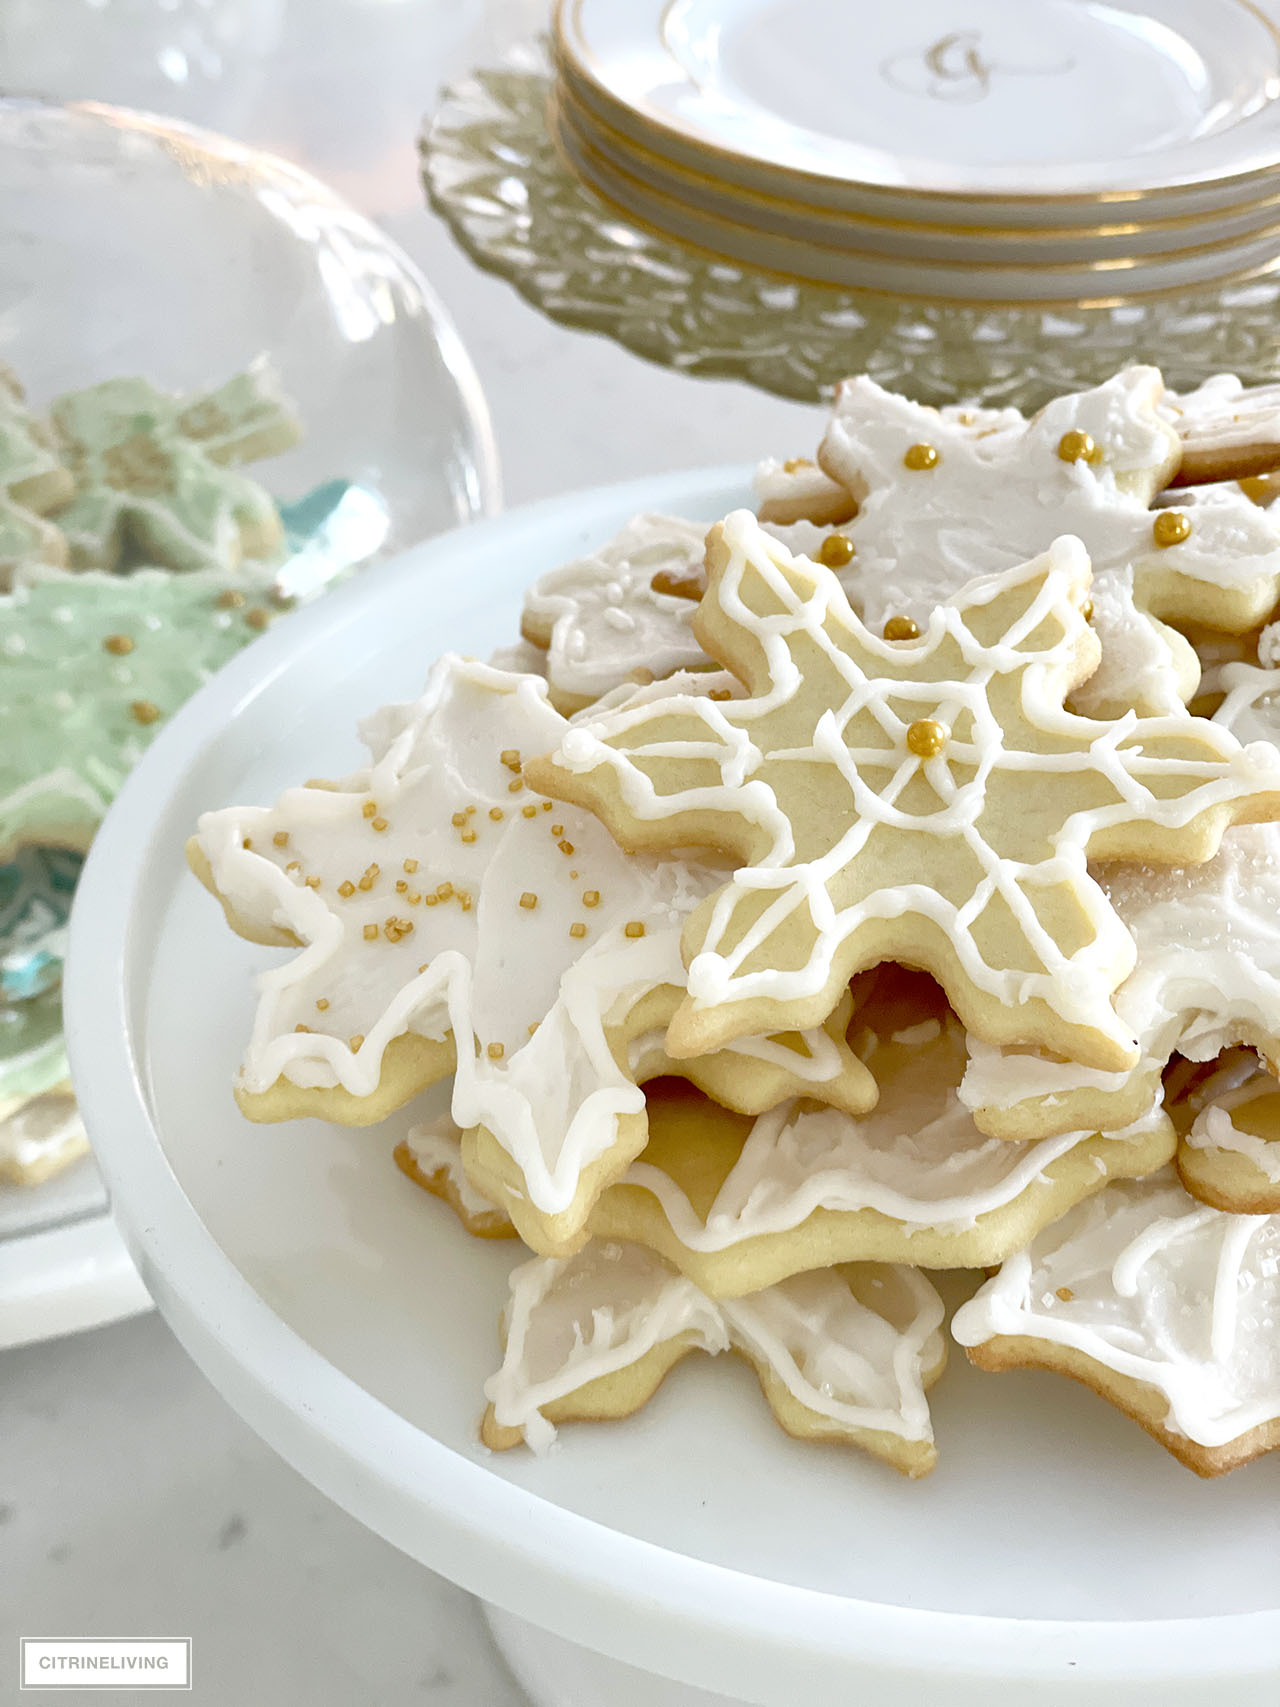 Details of pretty white frosted Christmas cookies decorated with gold sprinkles.